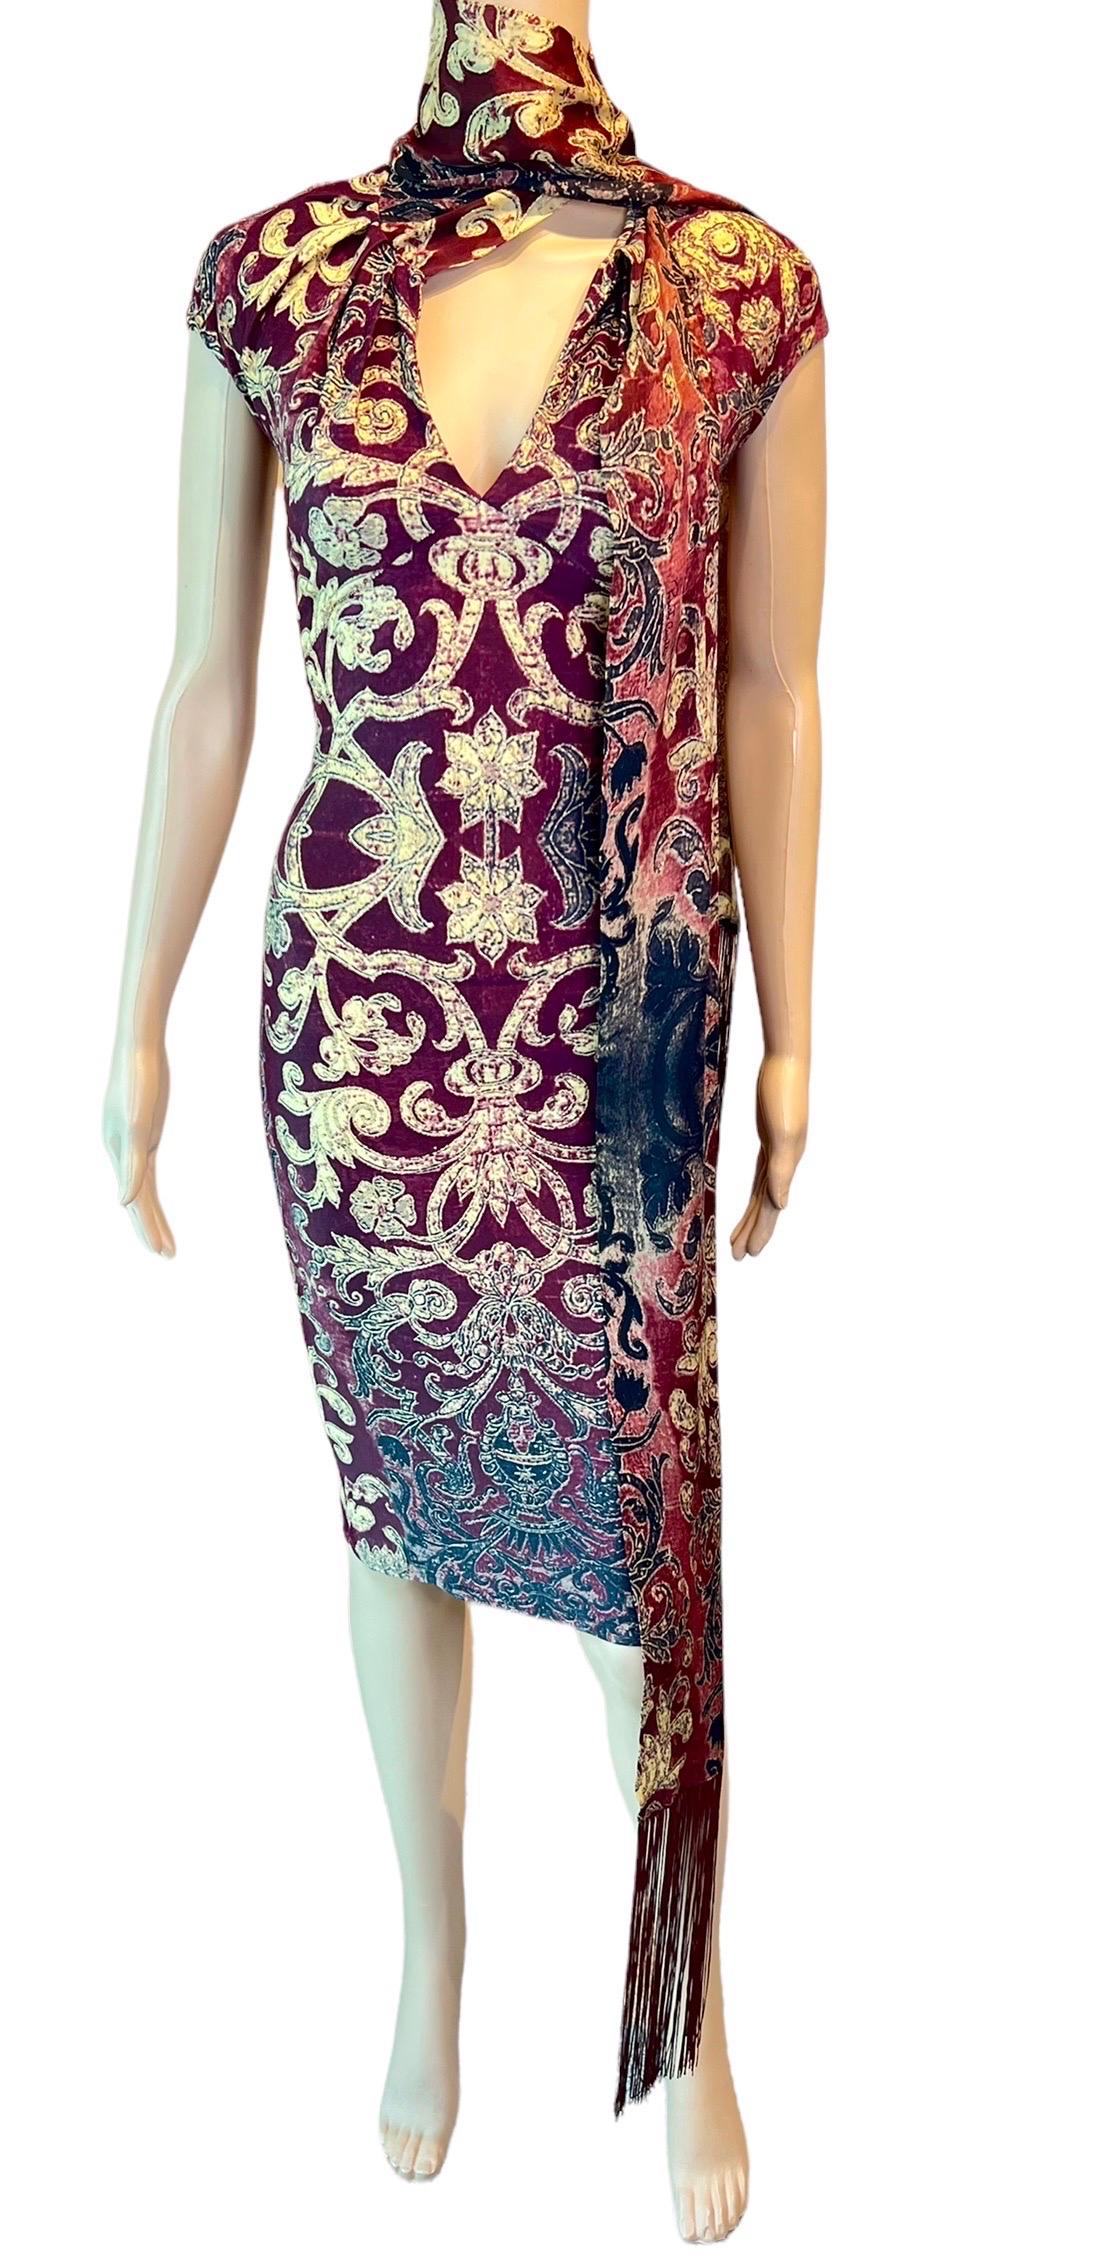 Roberto Cavalli FW 2004 Runway Red Gold Brocade Print Bodycon Fringe Scarf Dress In Excellent Condition For Sale In Naples, FL